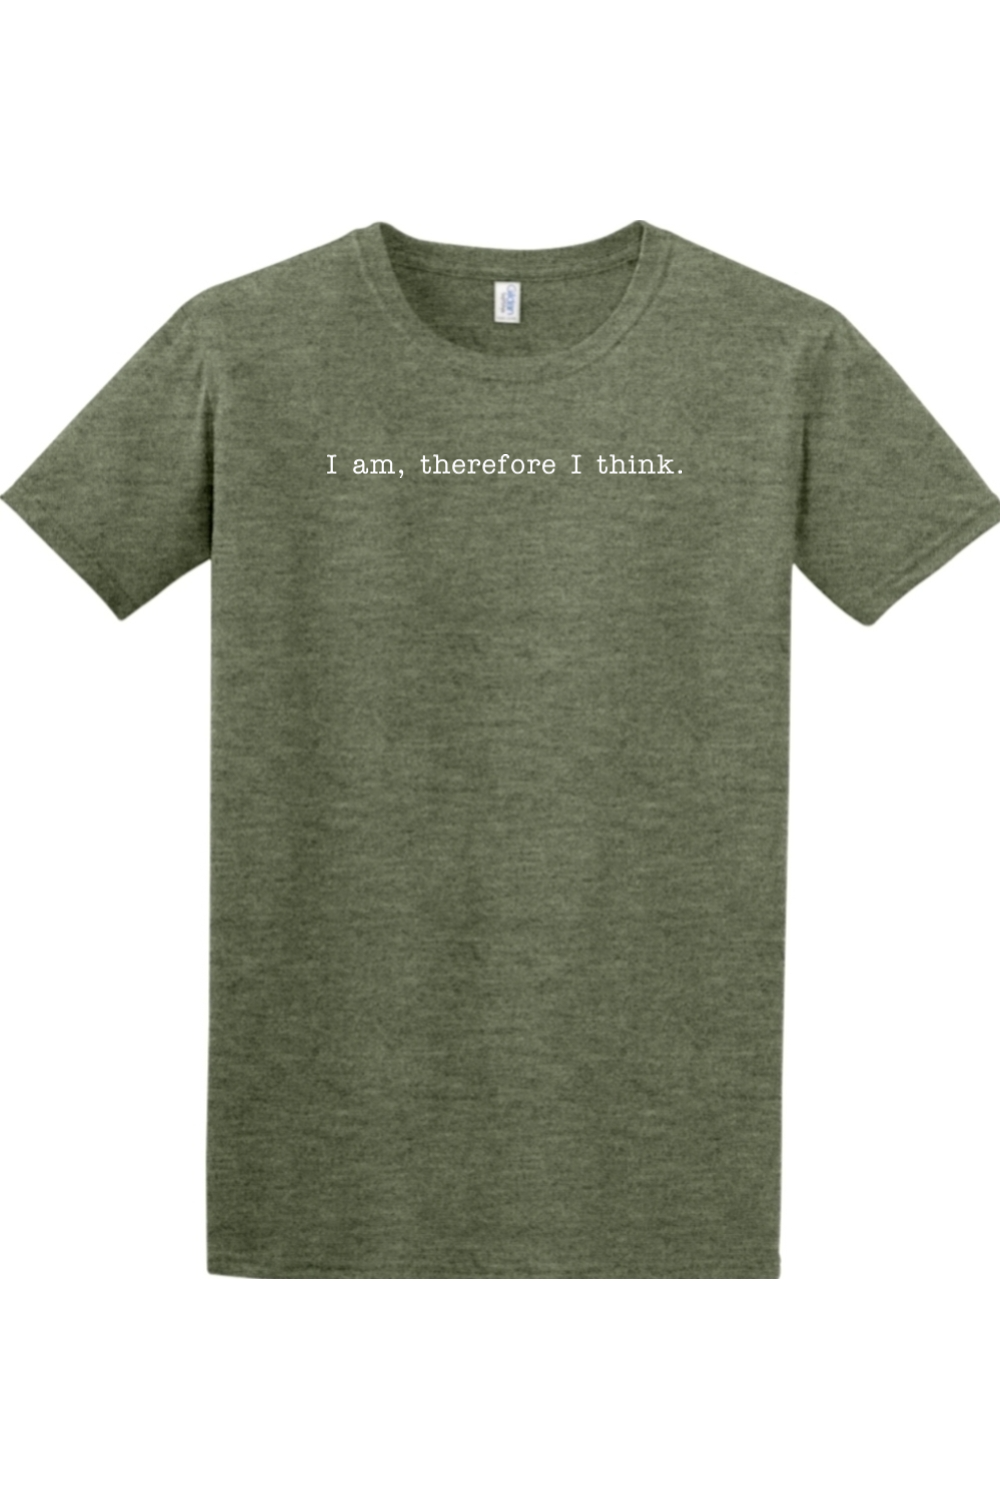 I am, Therefore I Think - Realism Philosophy Adult T-Shirt